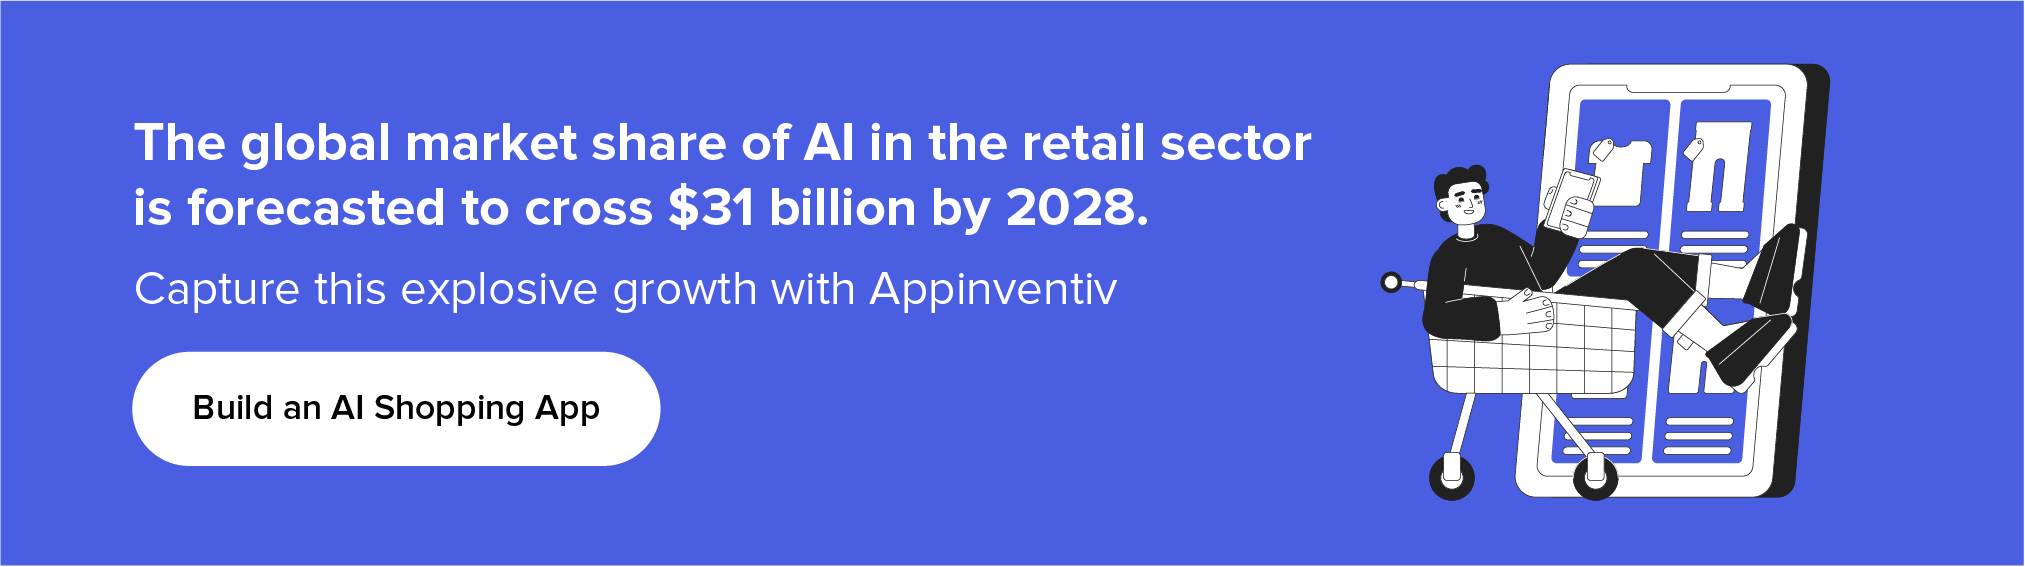 Build An AI Shopping App with Appinventiv